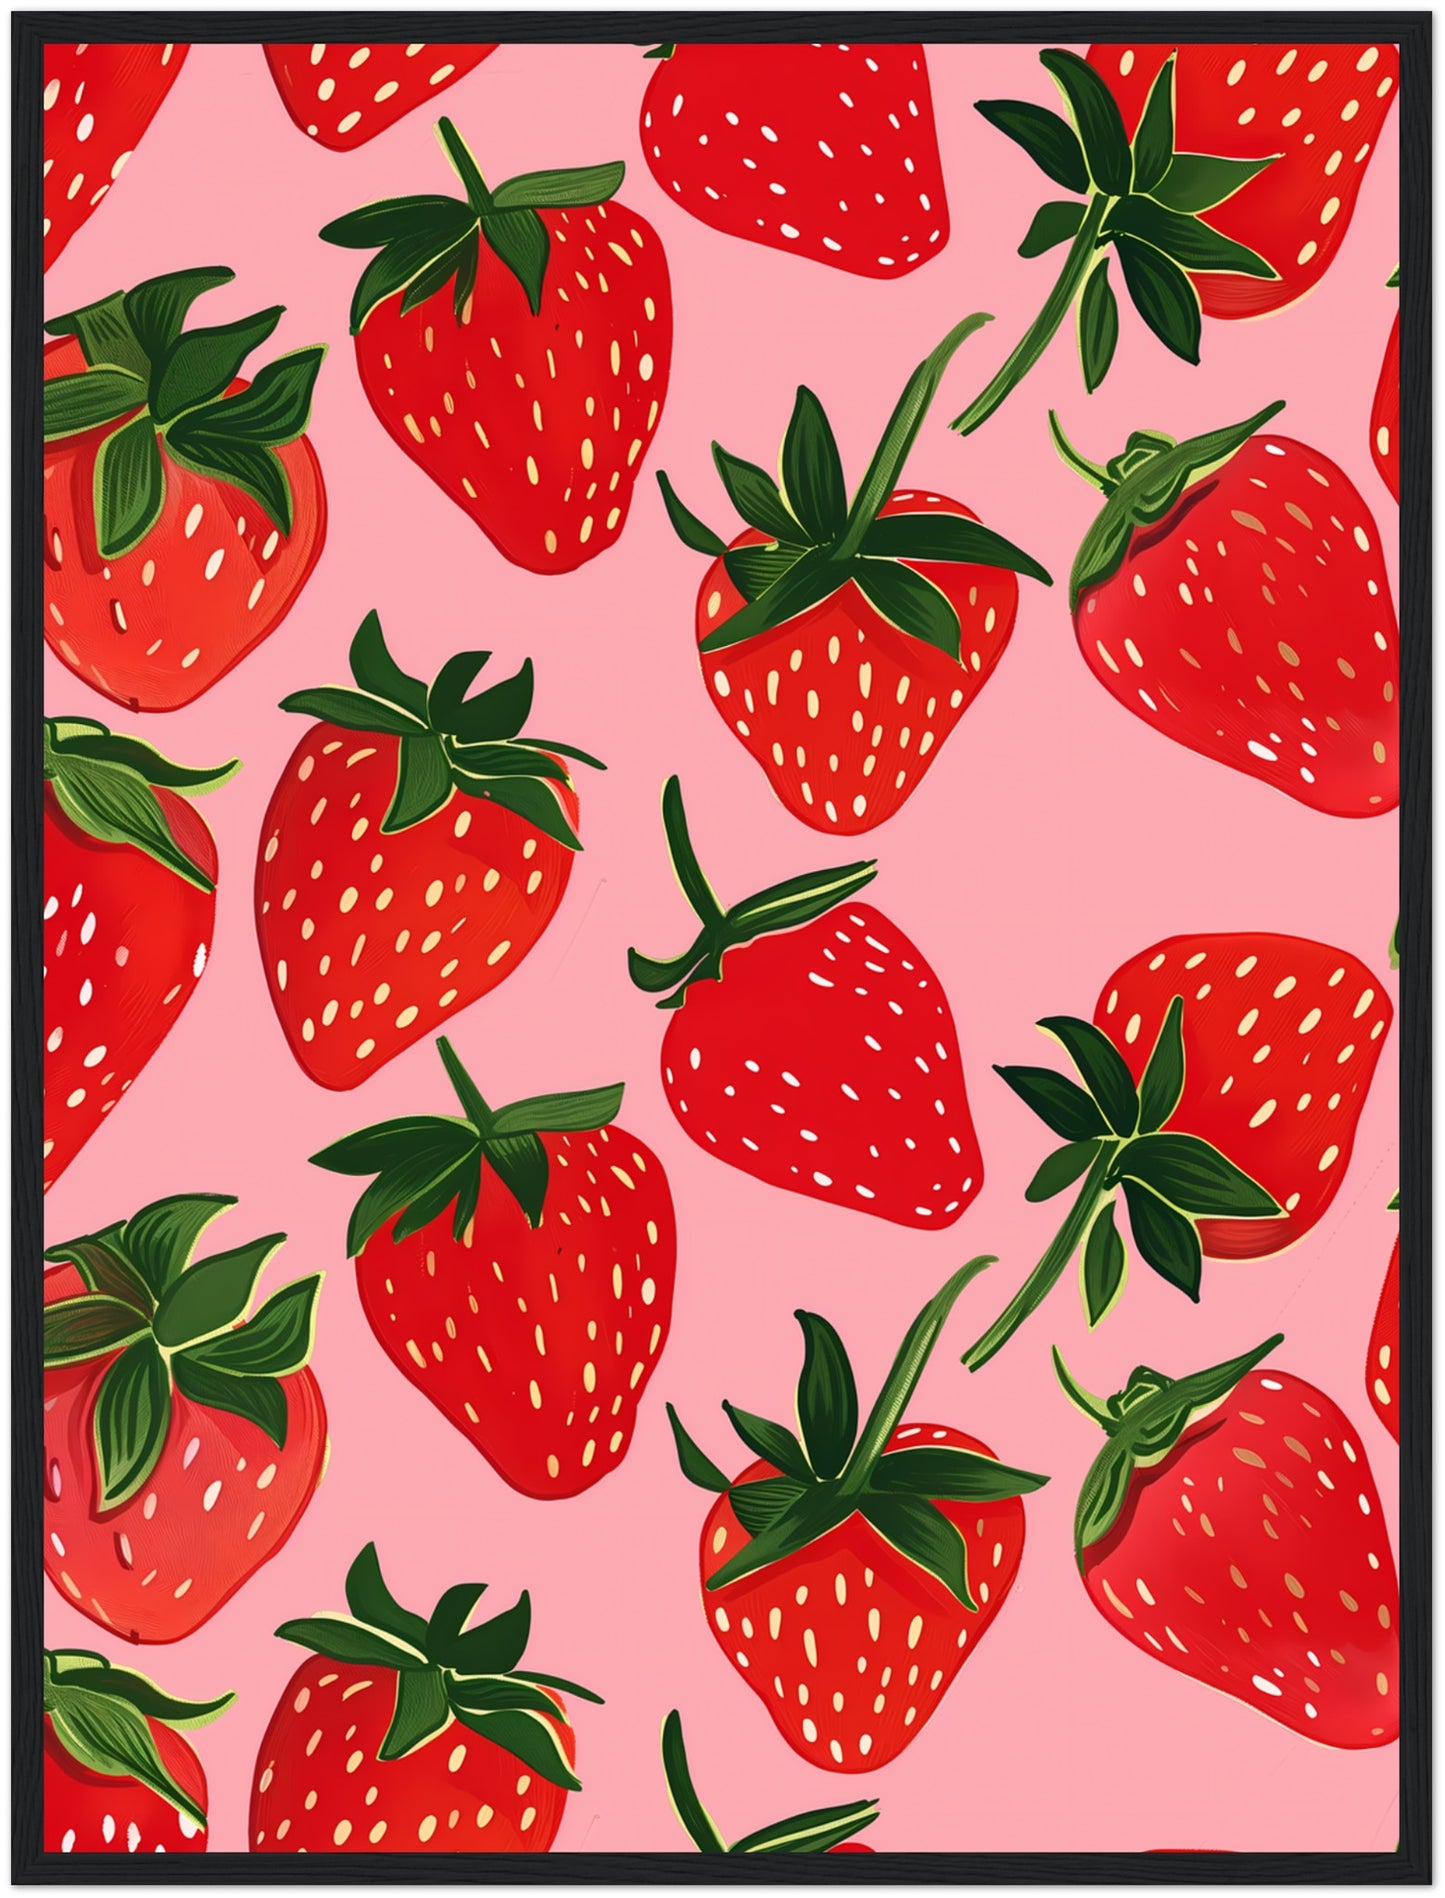 Colorful illustration of strawberries on a pink background.